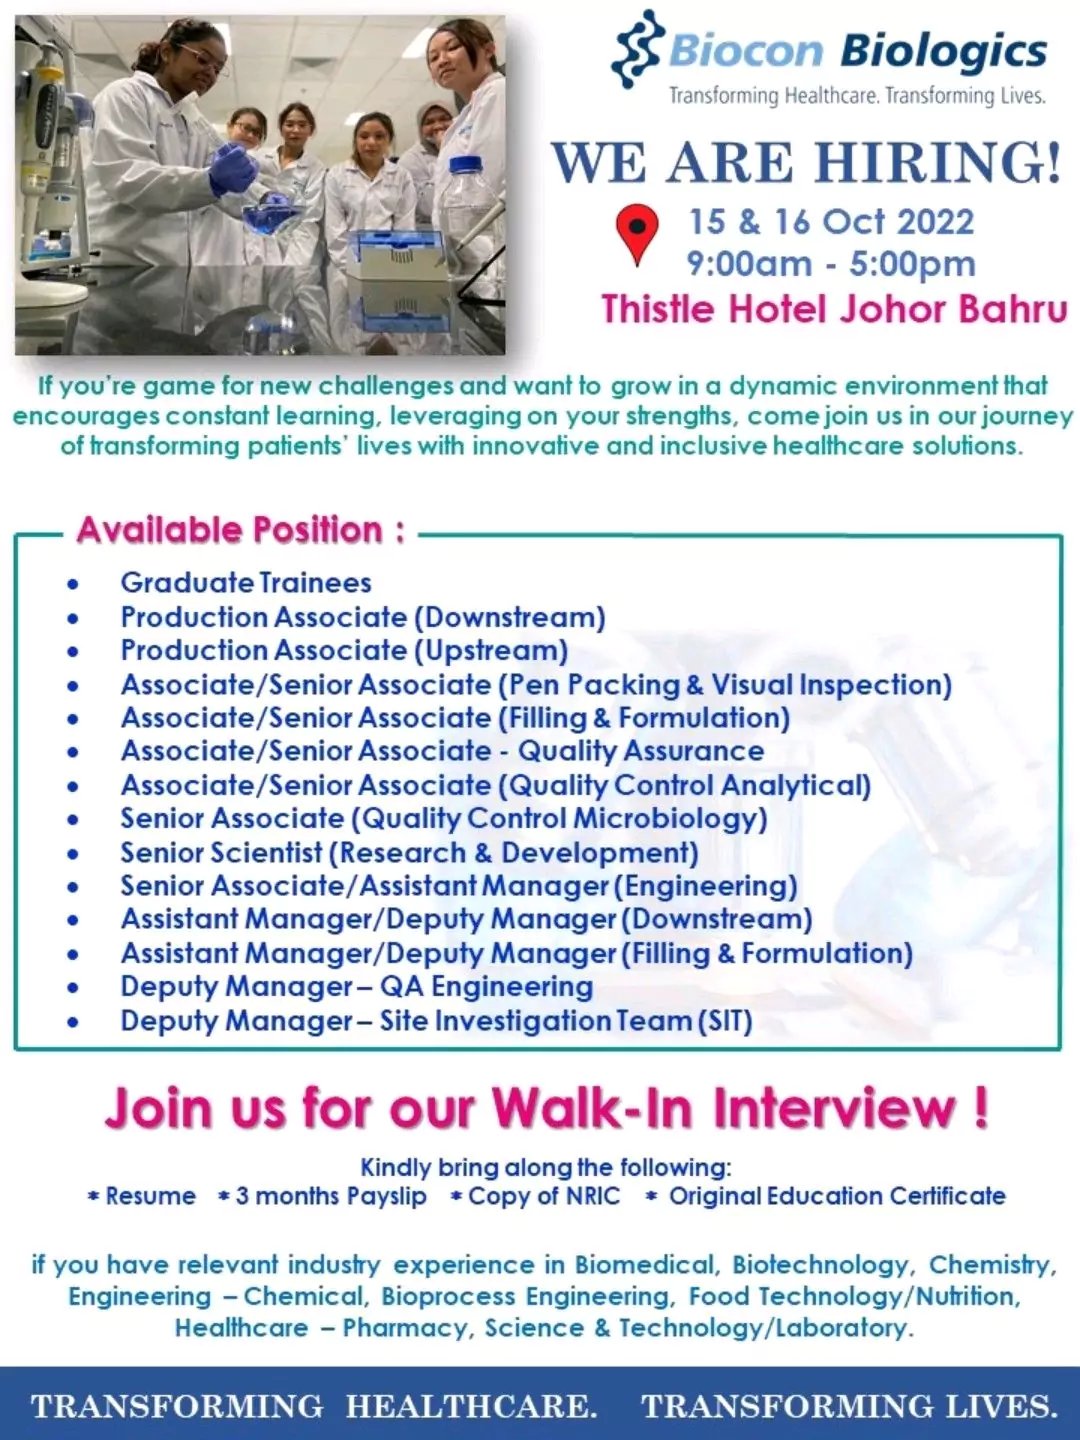 Biocon Biologics Conducting Walk in interview for Multiple Positions